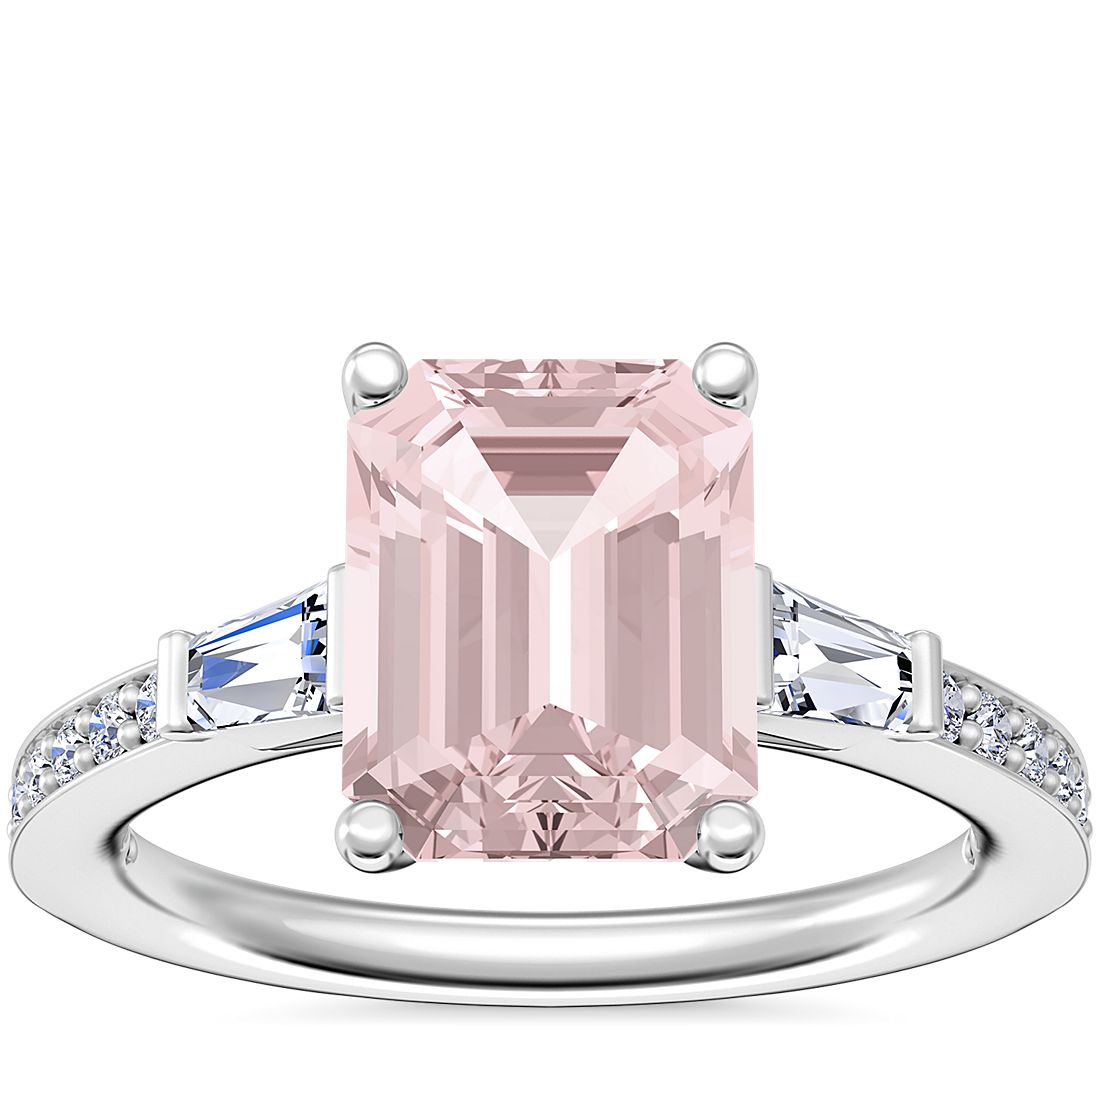 Tapered Baguette Diamond Cathedral Engagement Ring with Emerald-Cut Morganite in Platinum (9x7mm)